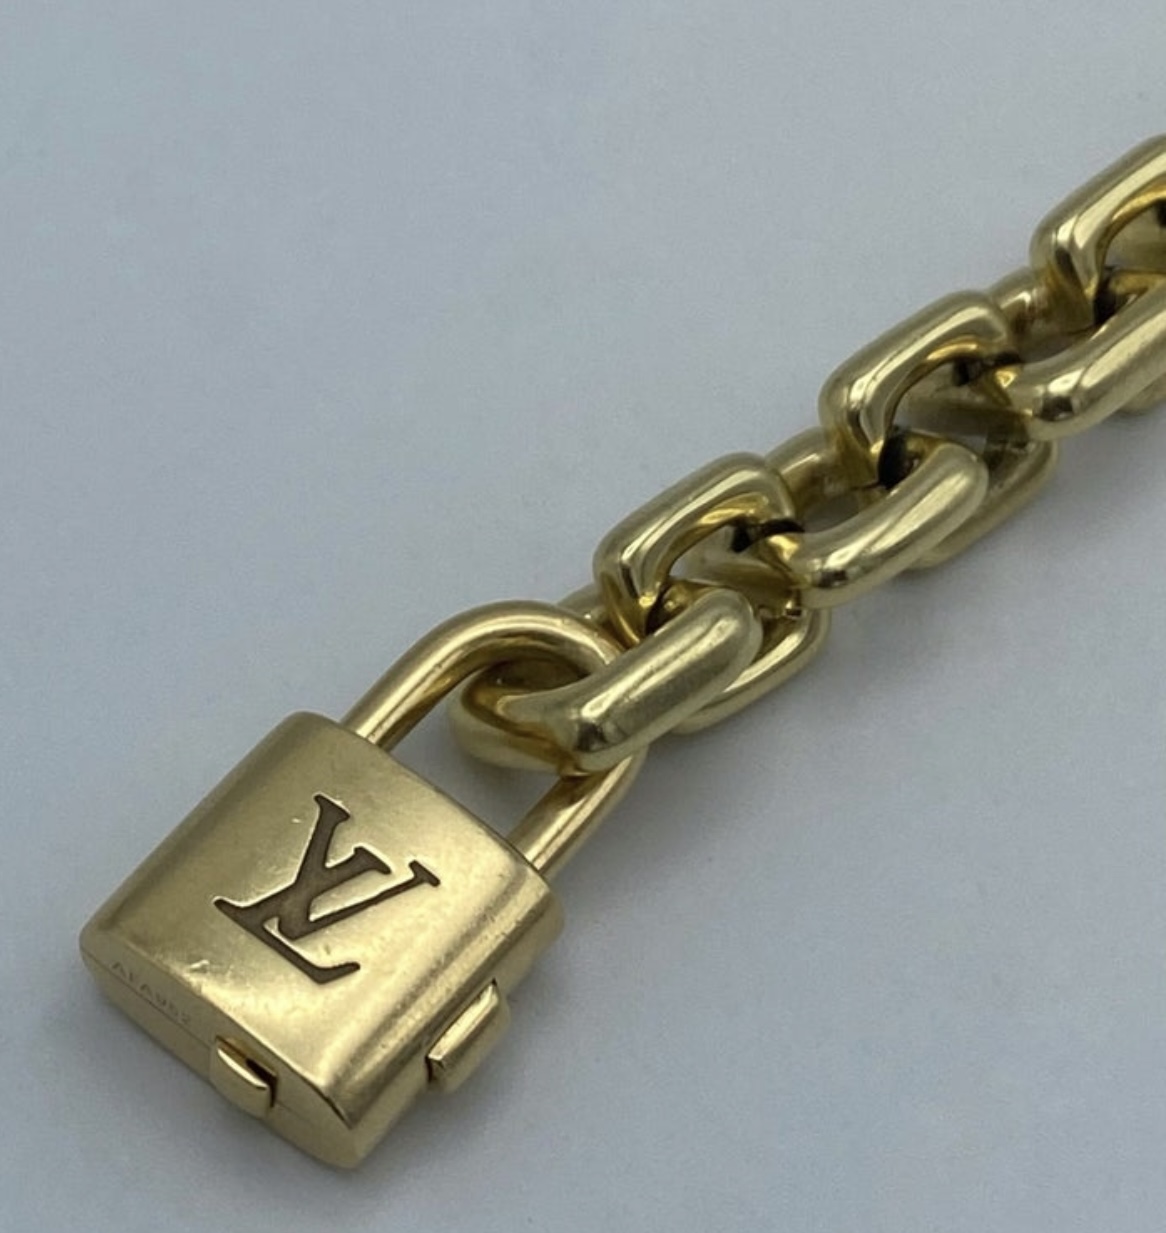 Louis Vuitton Gold Charm Bracelet with Lock and Keys at 1stDibs